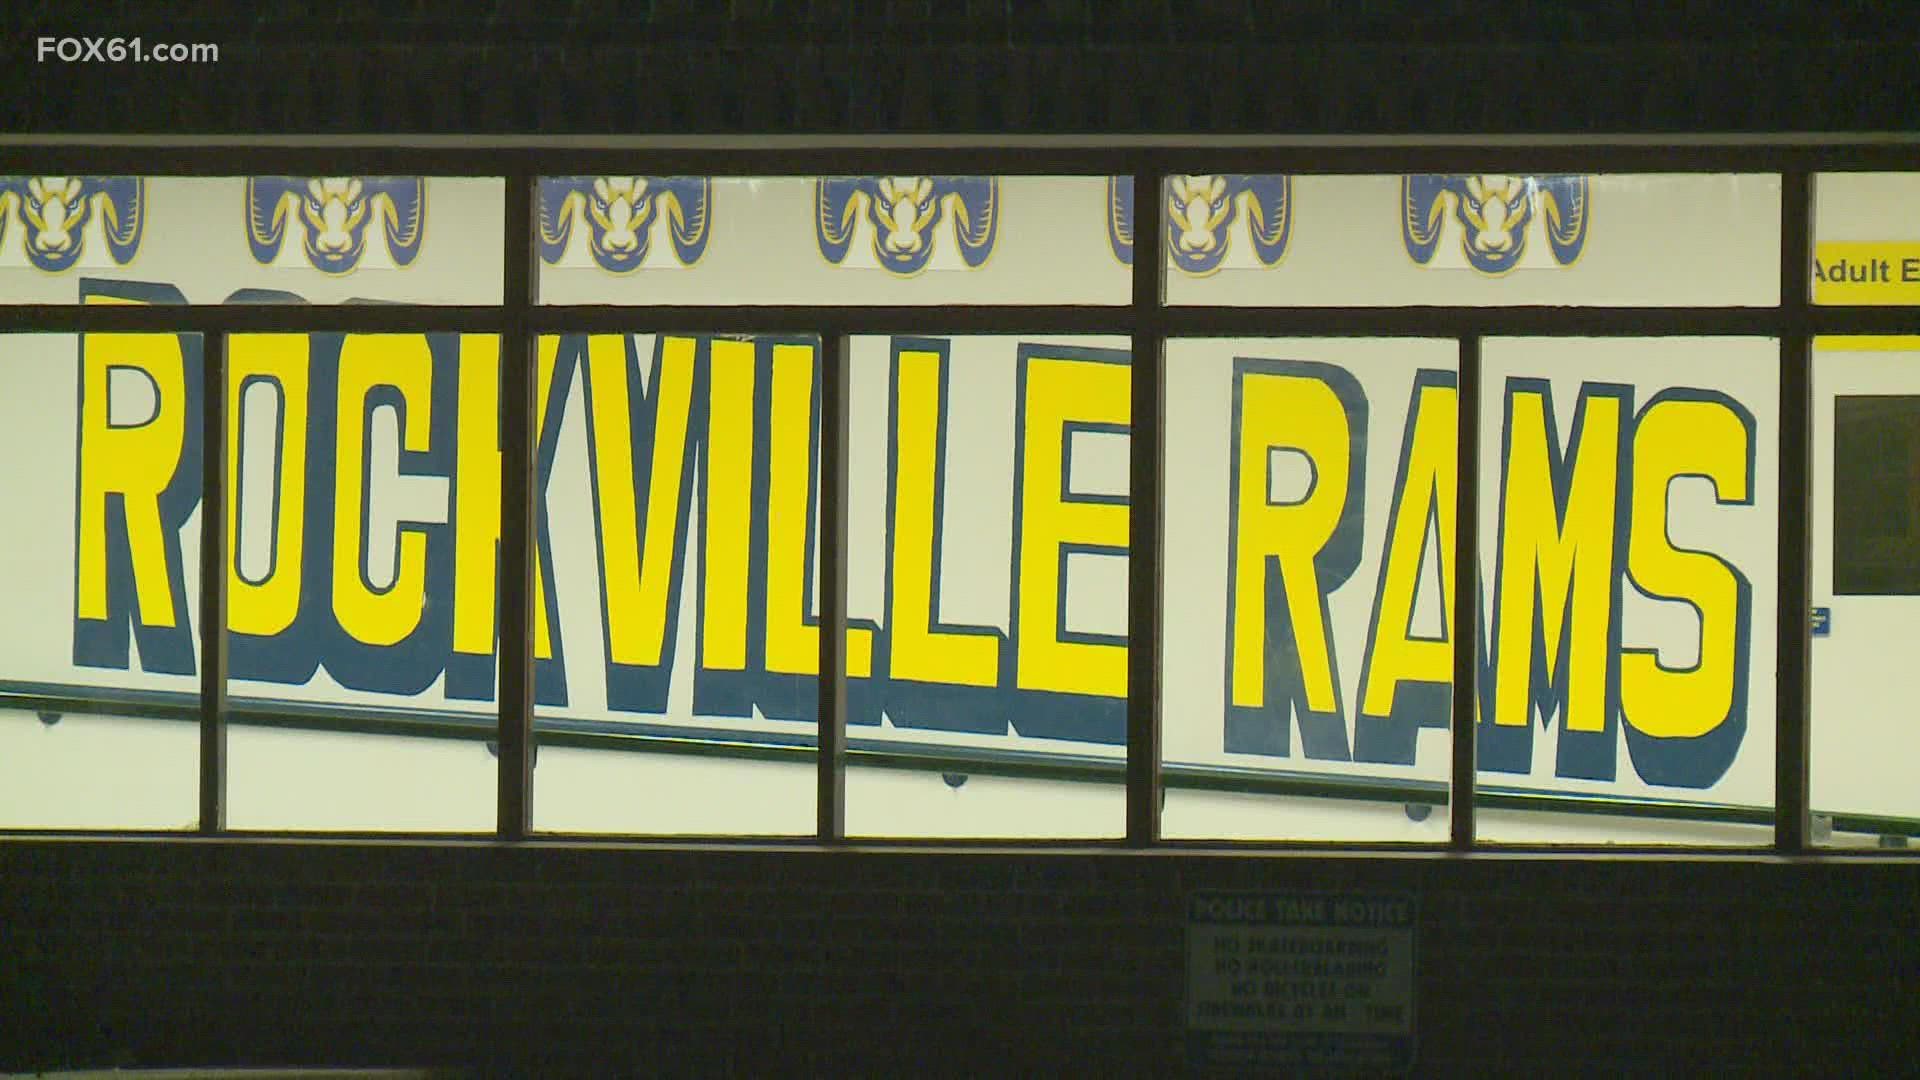 The latest juvenile arrest comes after an incident that occurred at Rockville High in Vernon on Wednesday. The male student made threats of violence, police said.